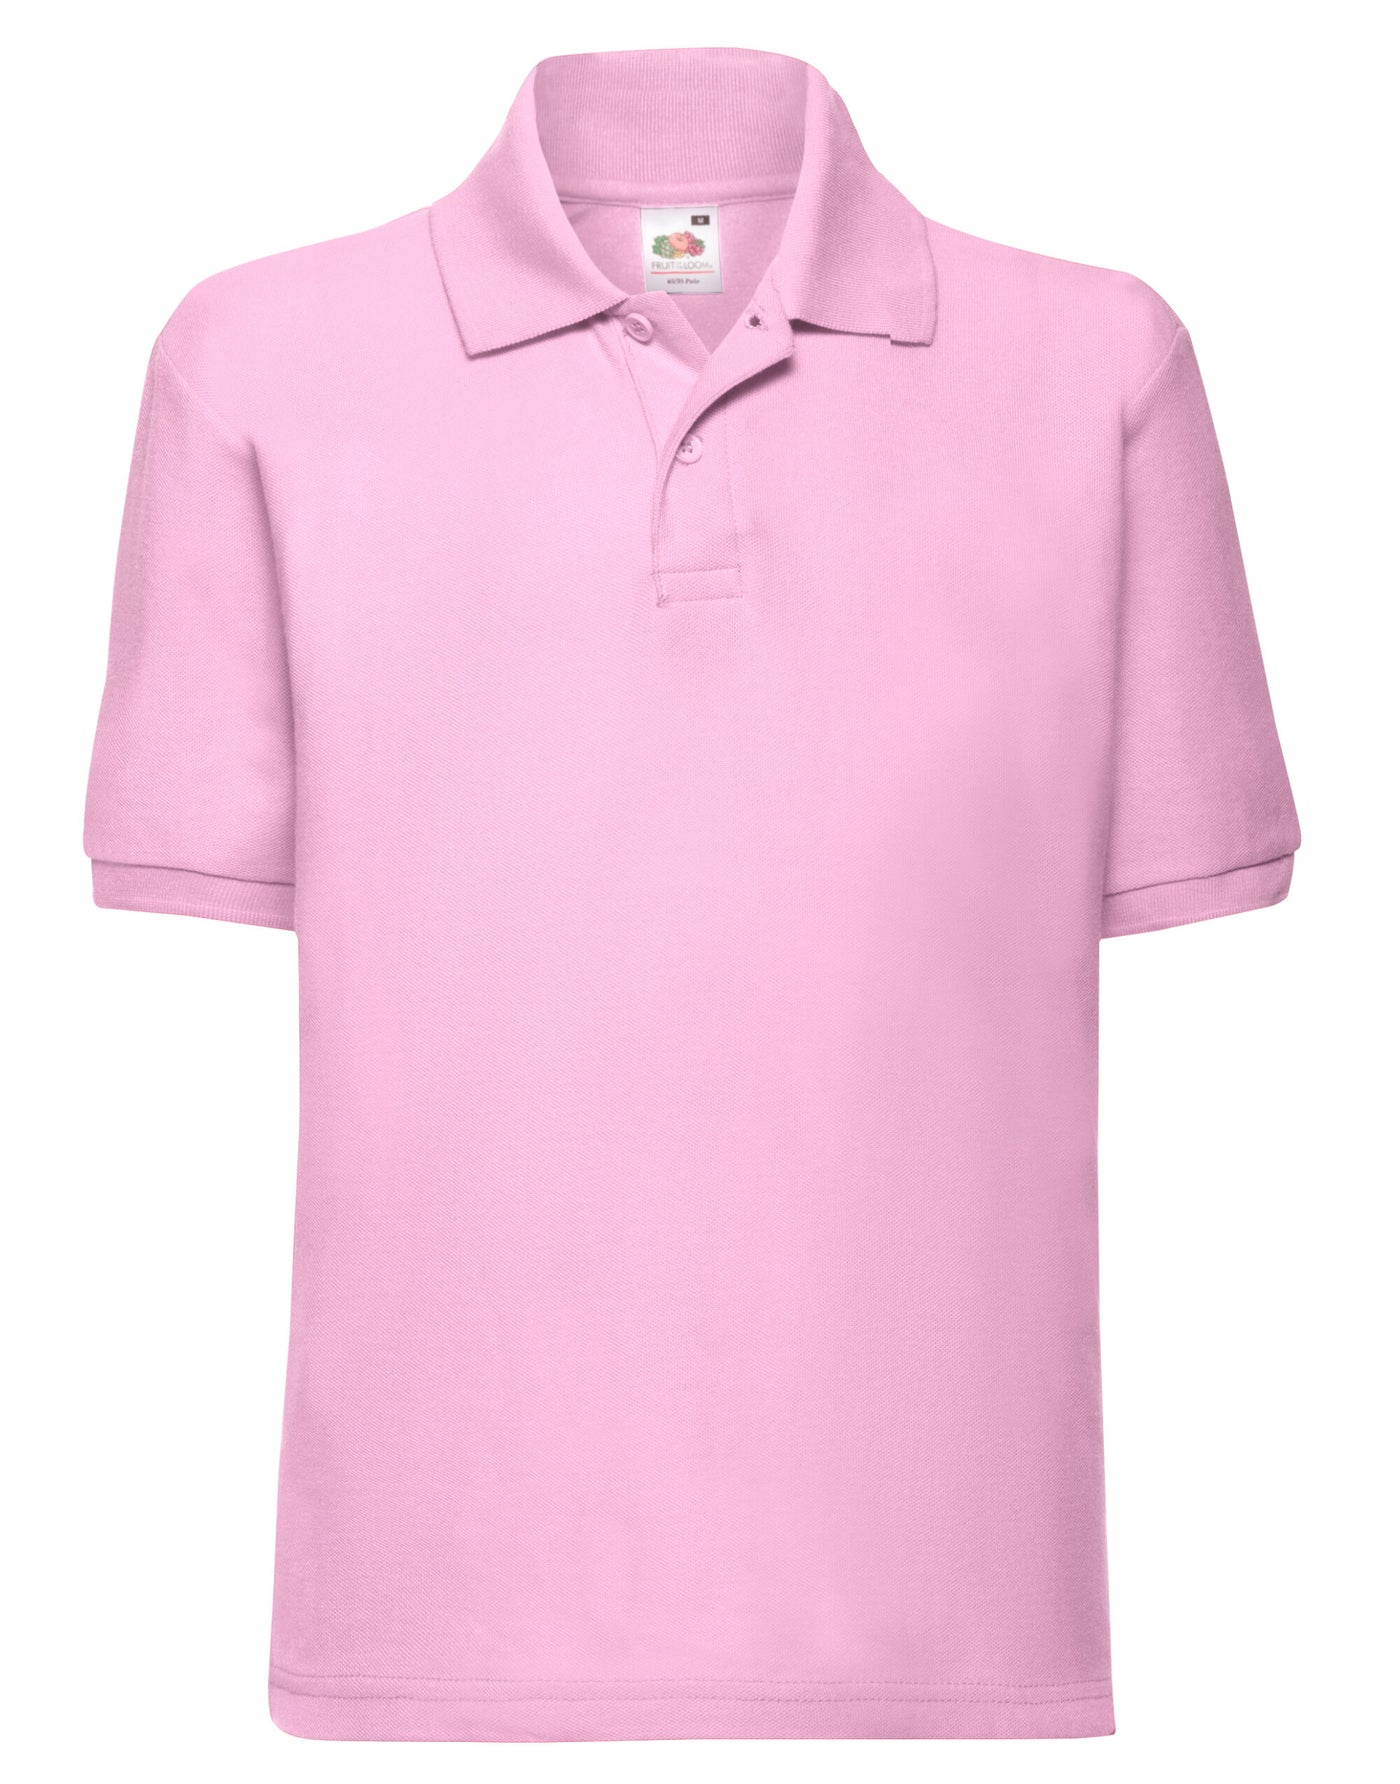 Kids Polo Shirt In Light Pink